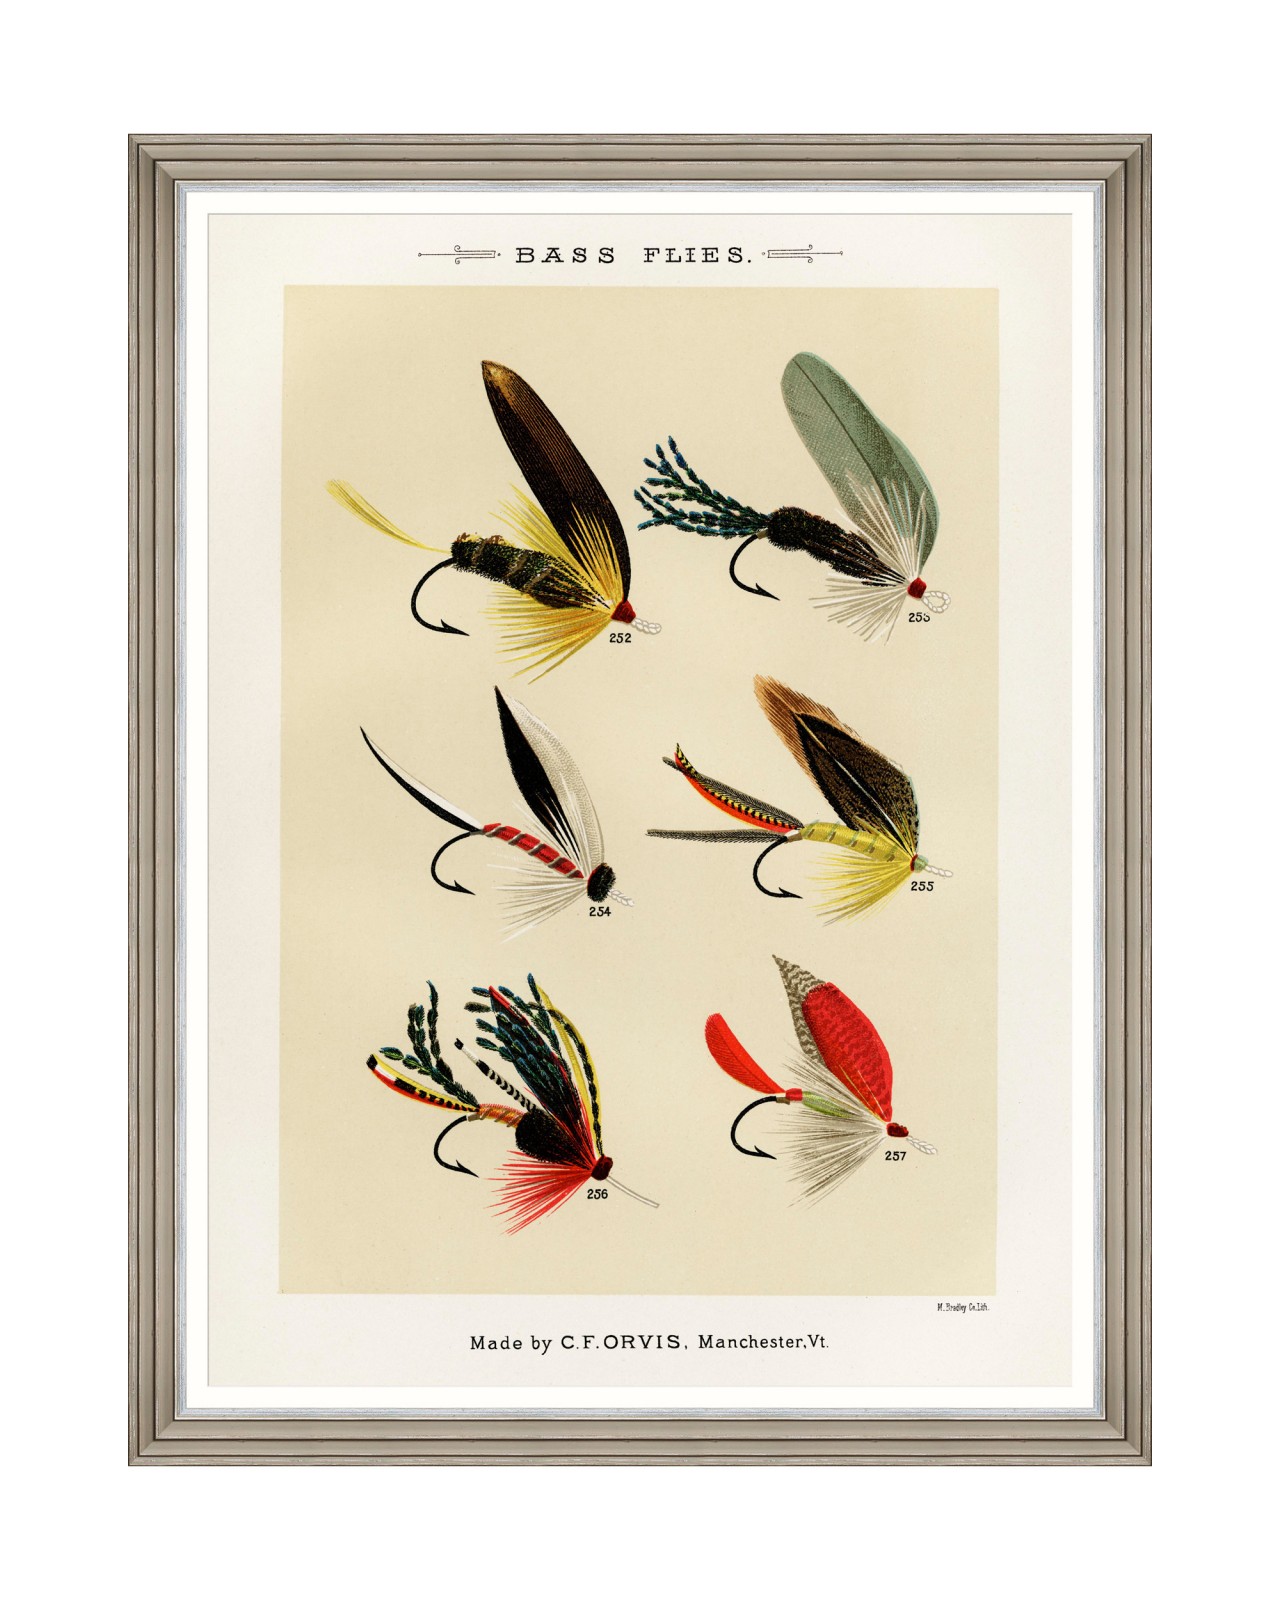 images/productimages/small/fishing-flies-iii-by-mary-orvis-marbury-framed-art-60x80cm-fa13330-1.jpg